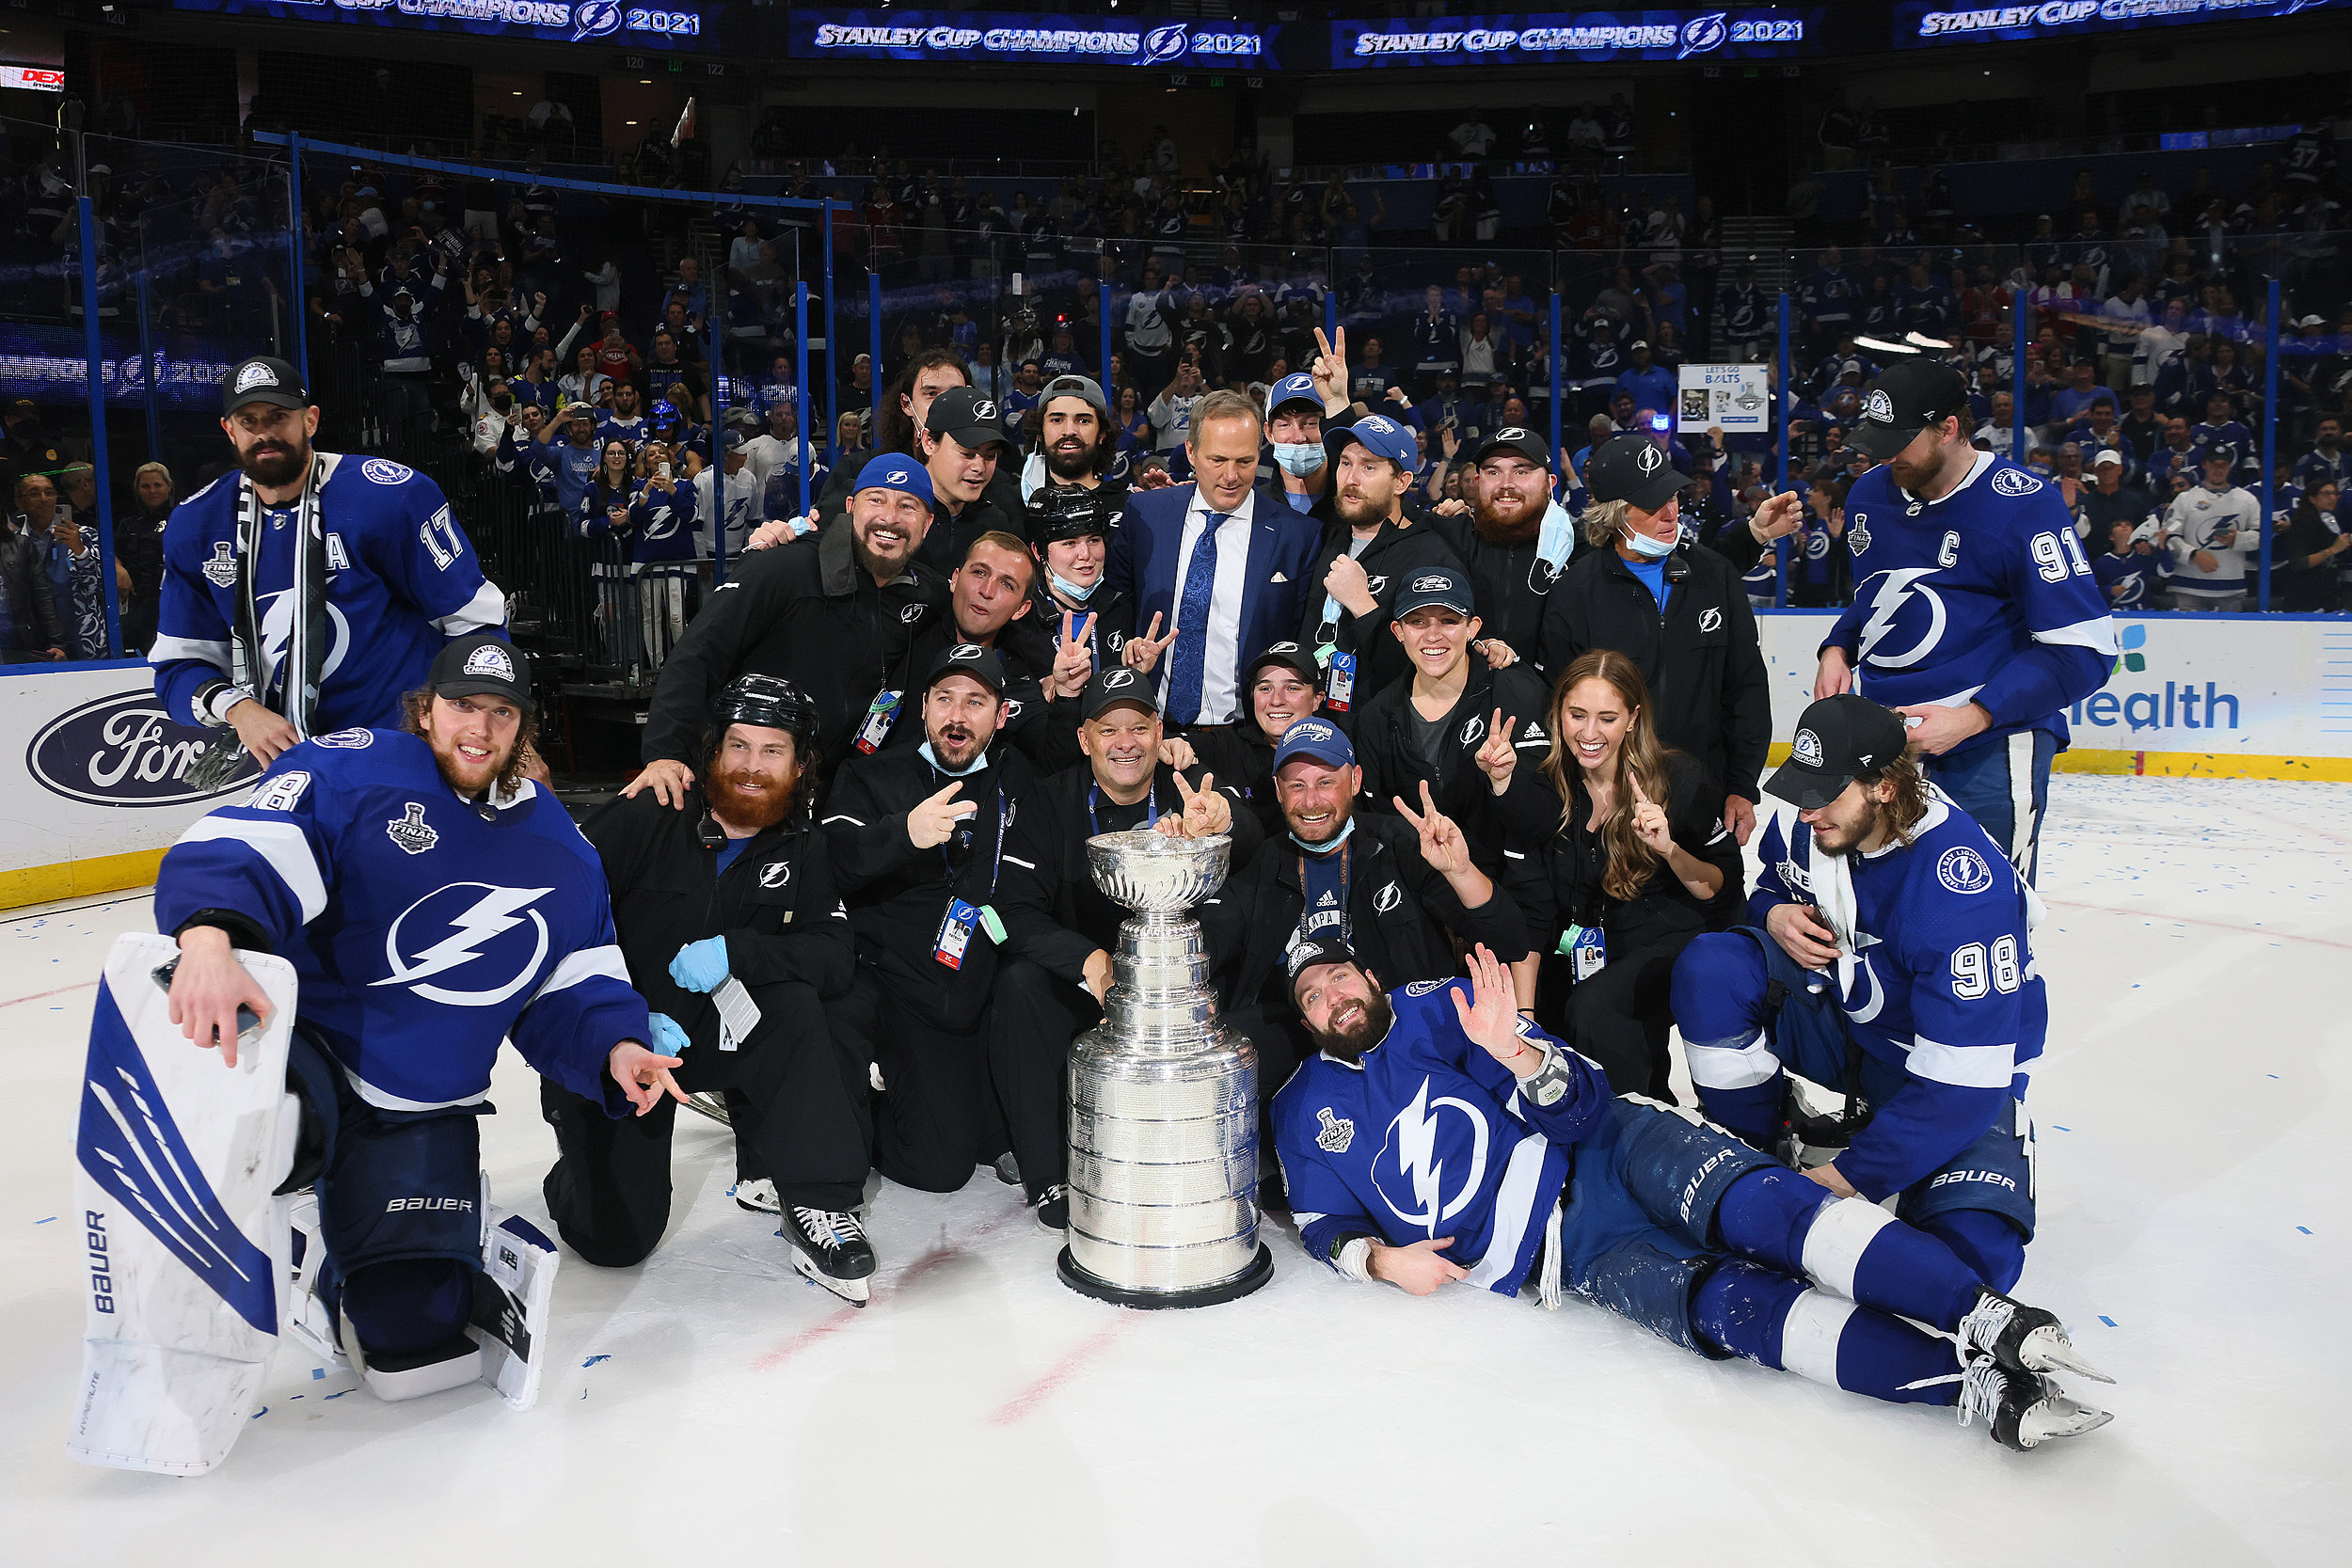 Lightning fall to defending Cup champions again